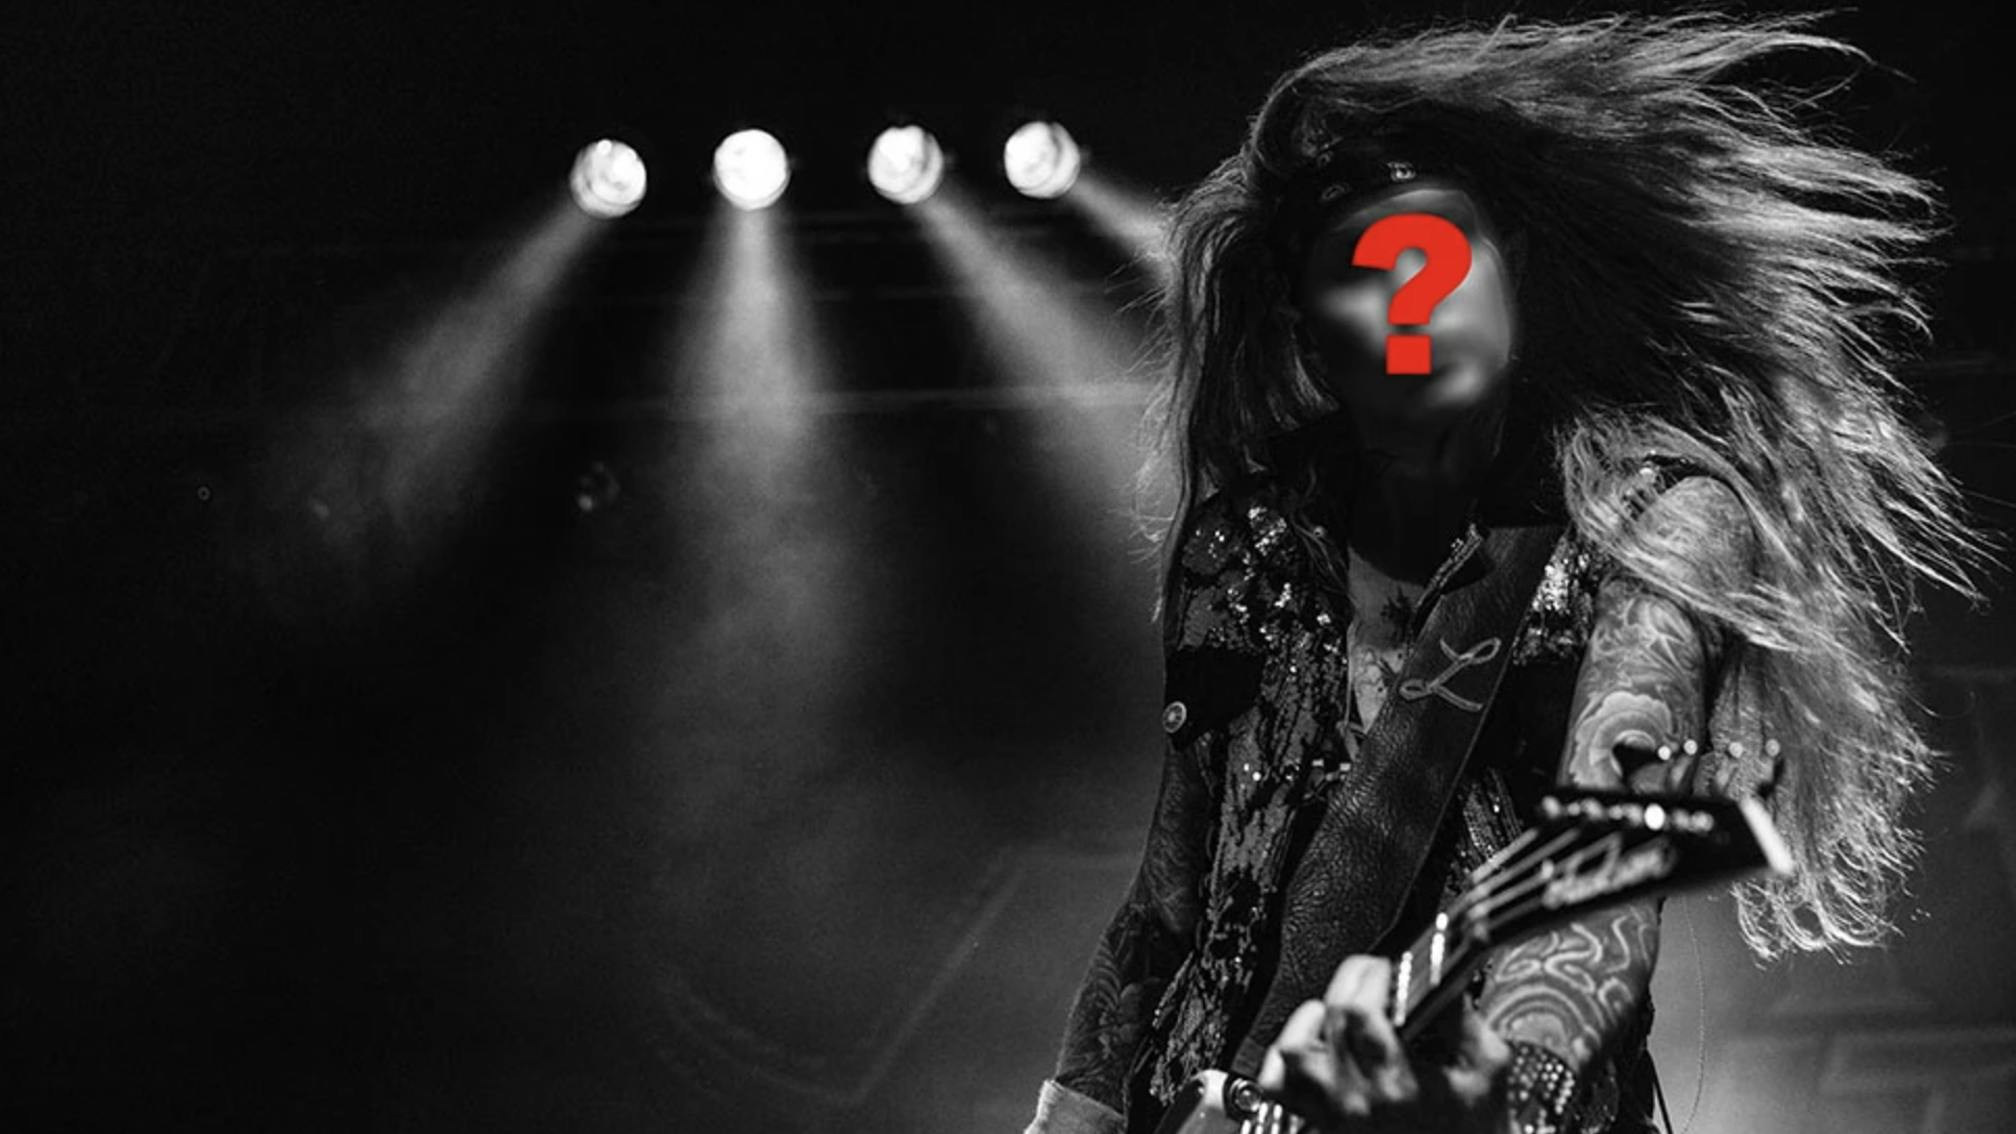 Here's your chance to audition to be Steel Panther's new bassist